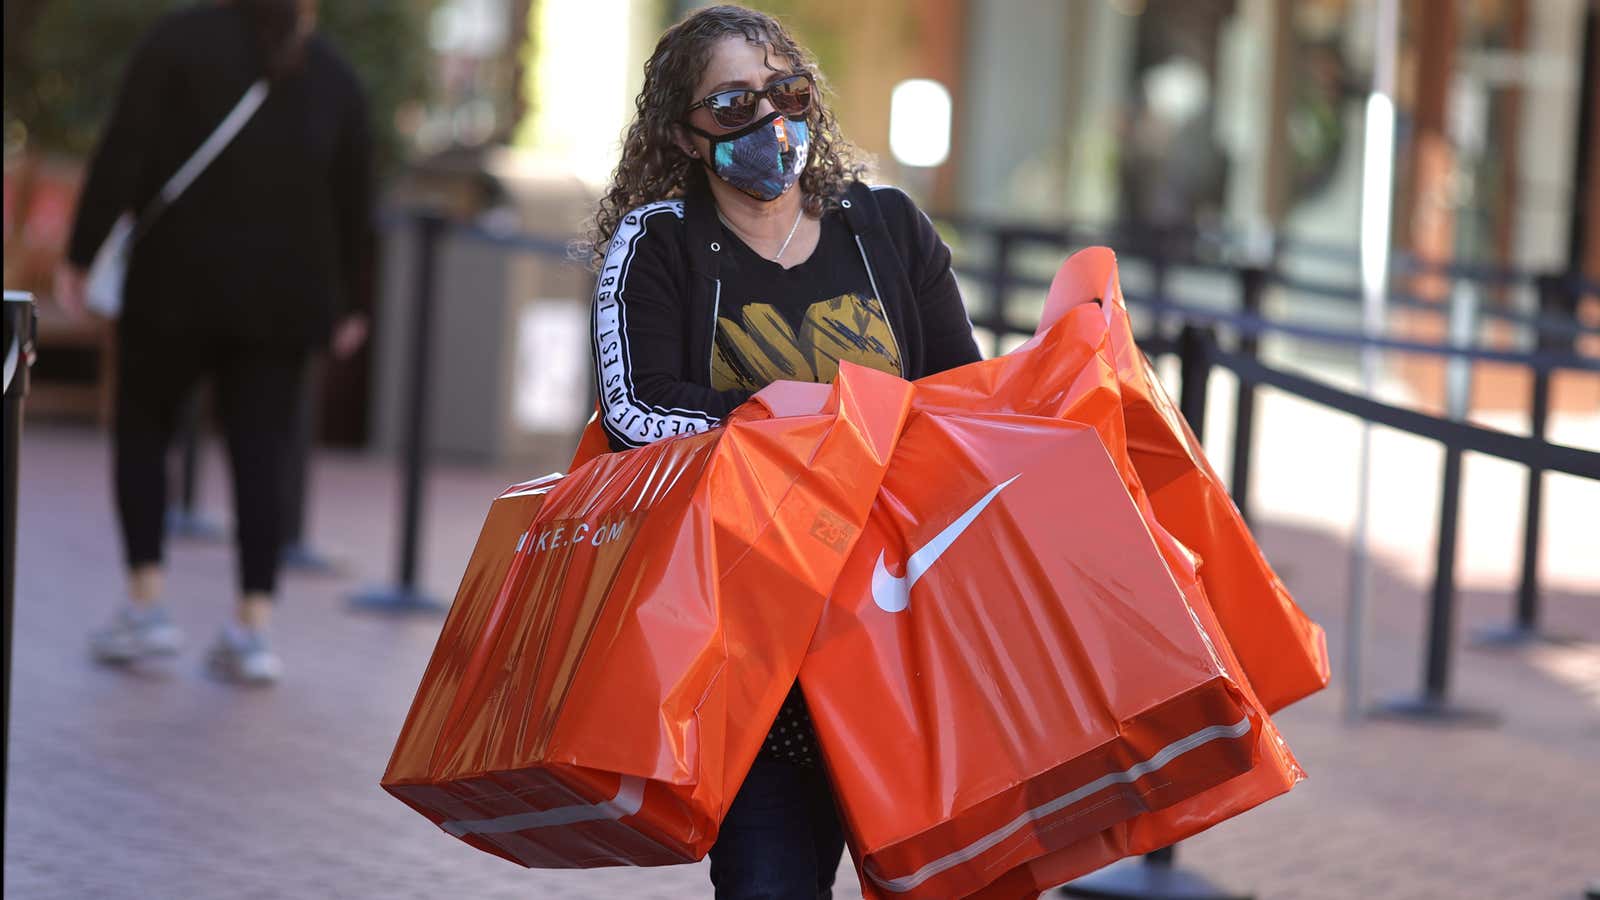 A woman carries Nike shopping bags at the Citadel Outlet mall, as the global outbreak of the coronavirus disease (COVID-19) continues, in Commerce, California, U.S.